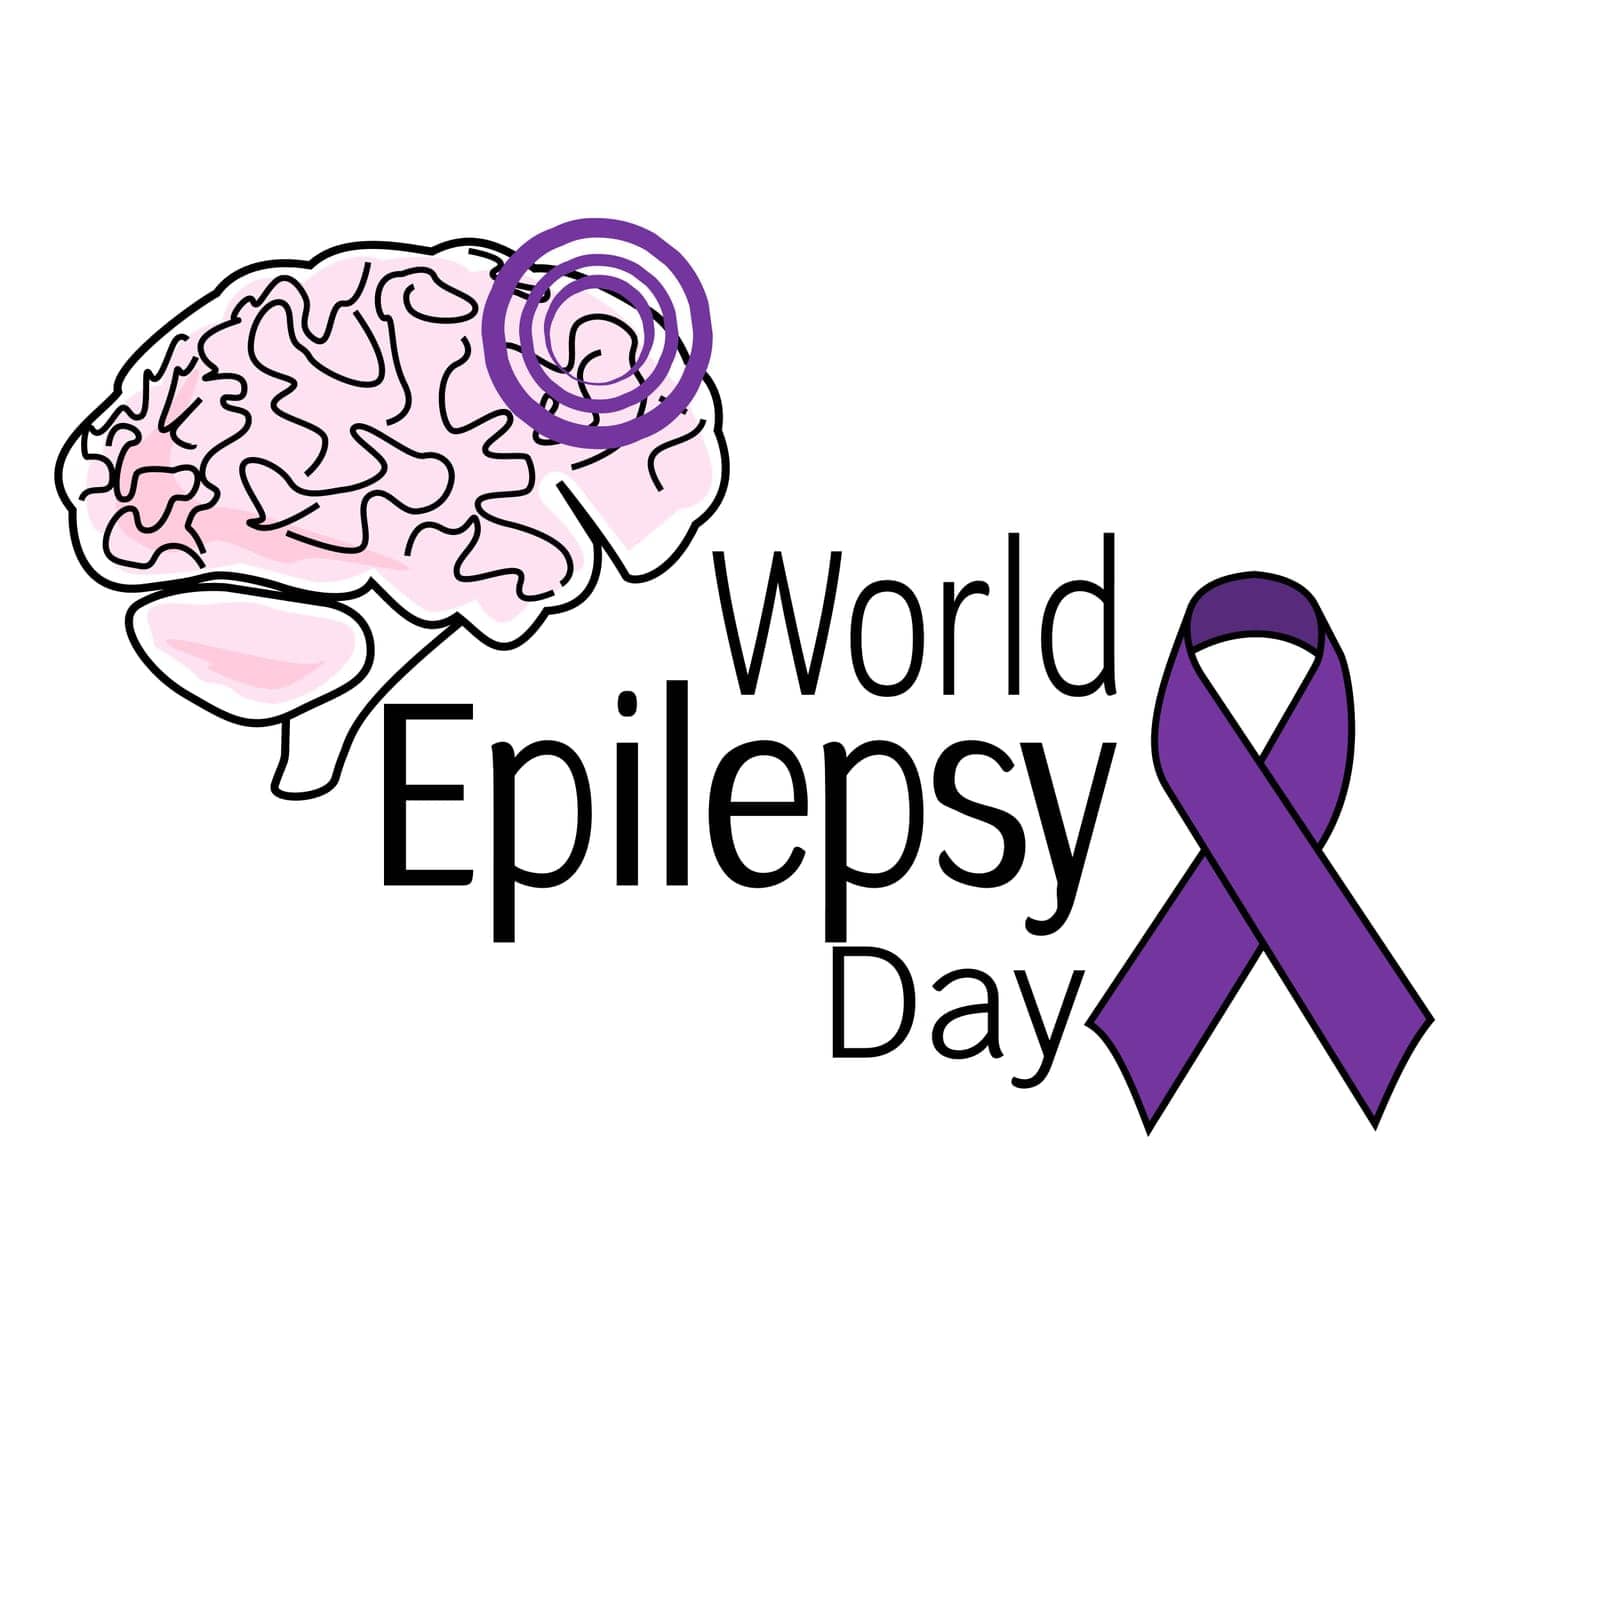 World Epilepsy Day, symbolic image of the brain, ribbons and themed inscription vector illustration